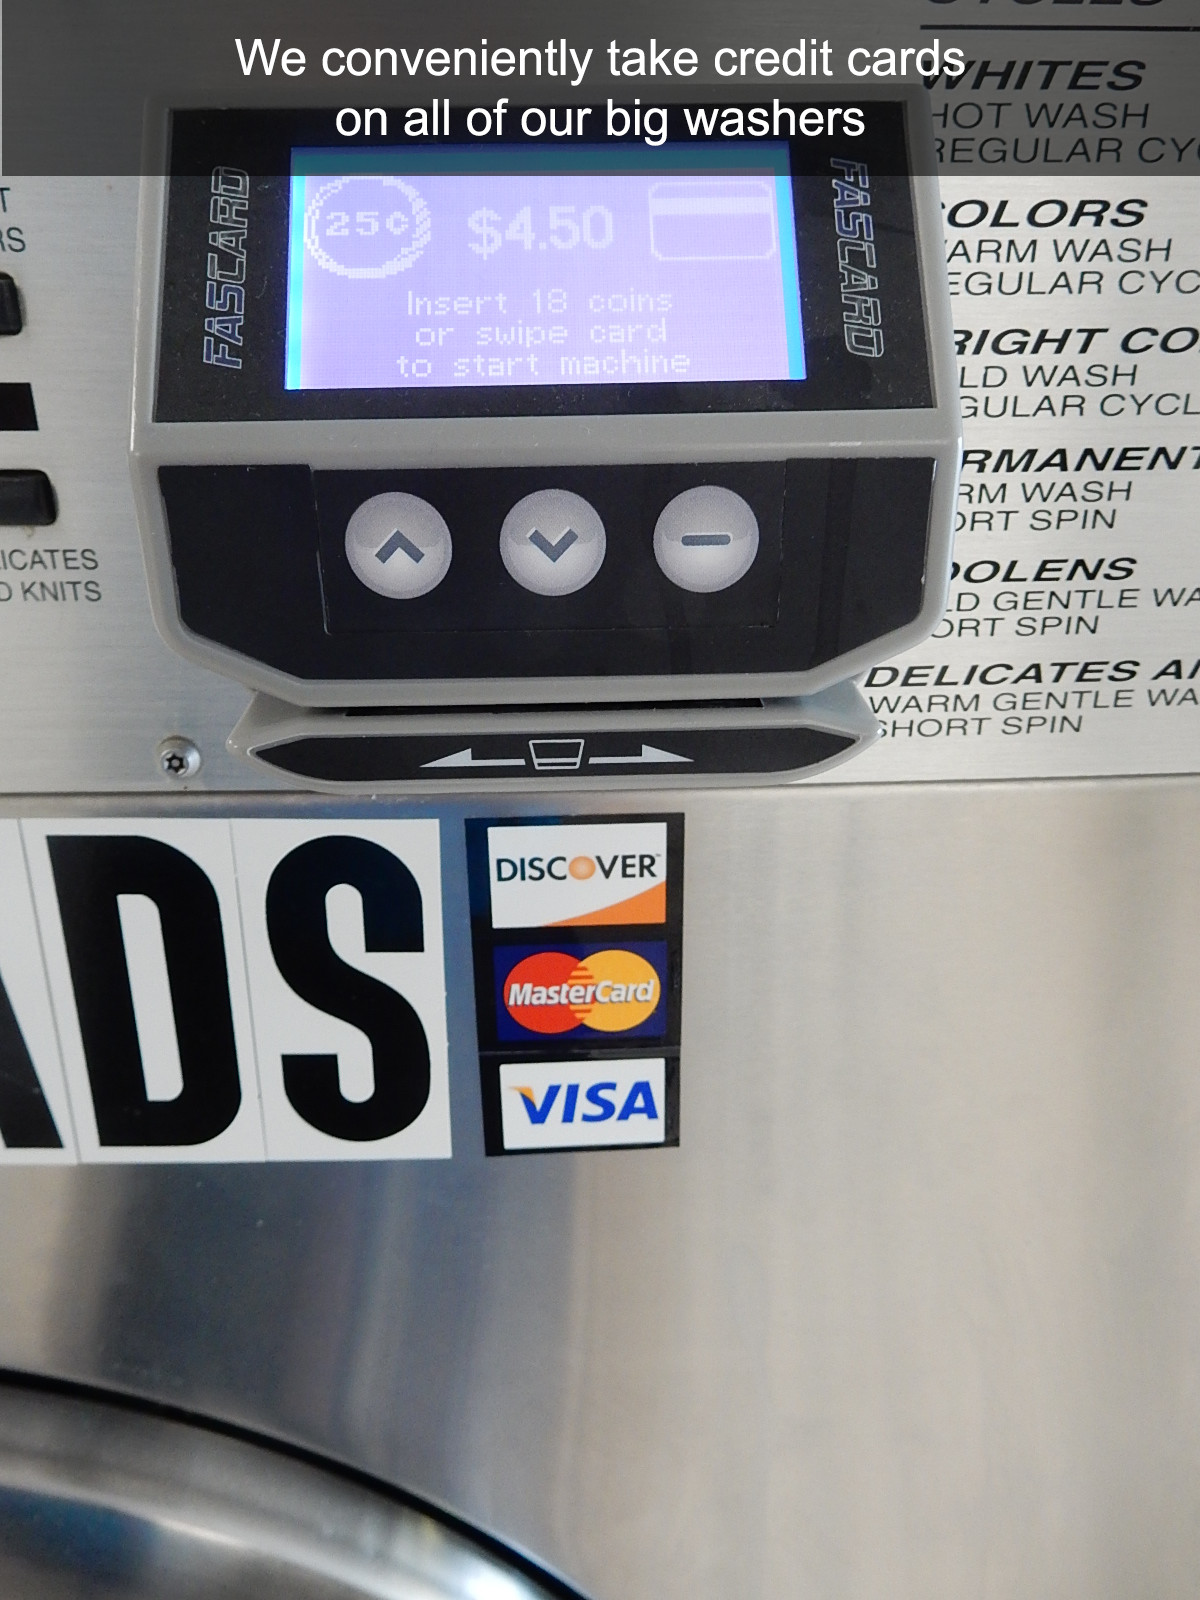 We conveniently take credit cards on all of our big washers